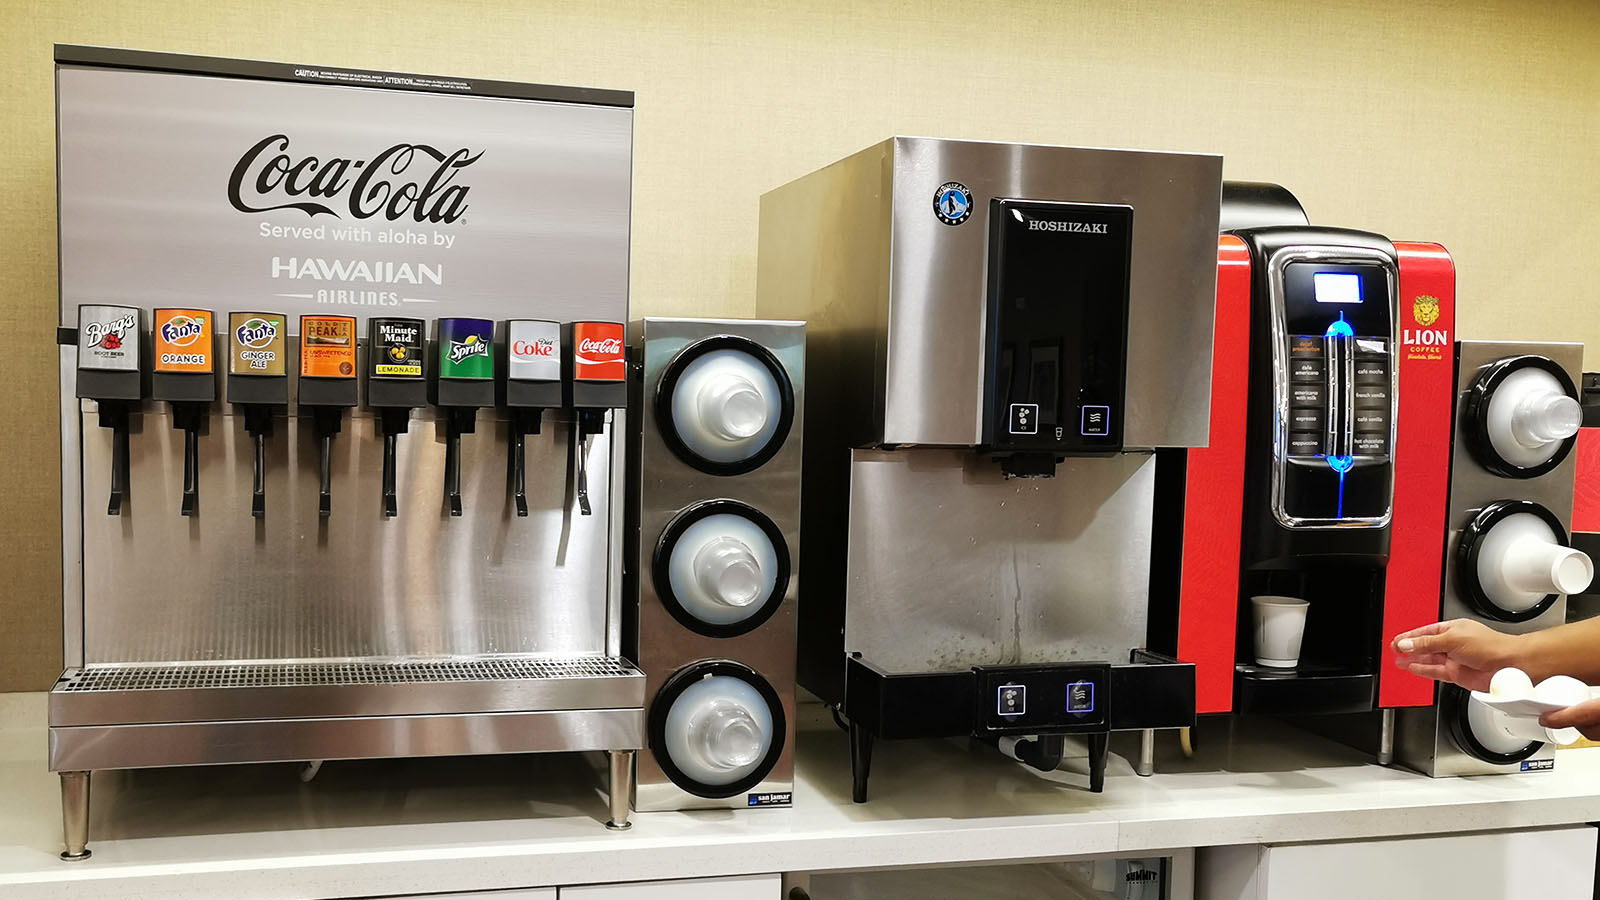 Soft drink and coffee choices in The Plumeria Lounge in Honolulu